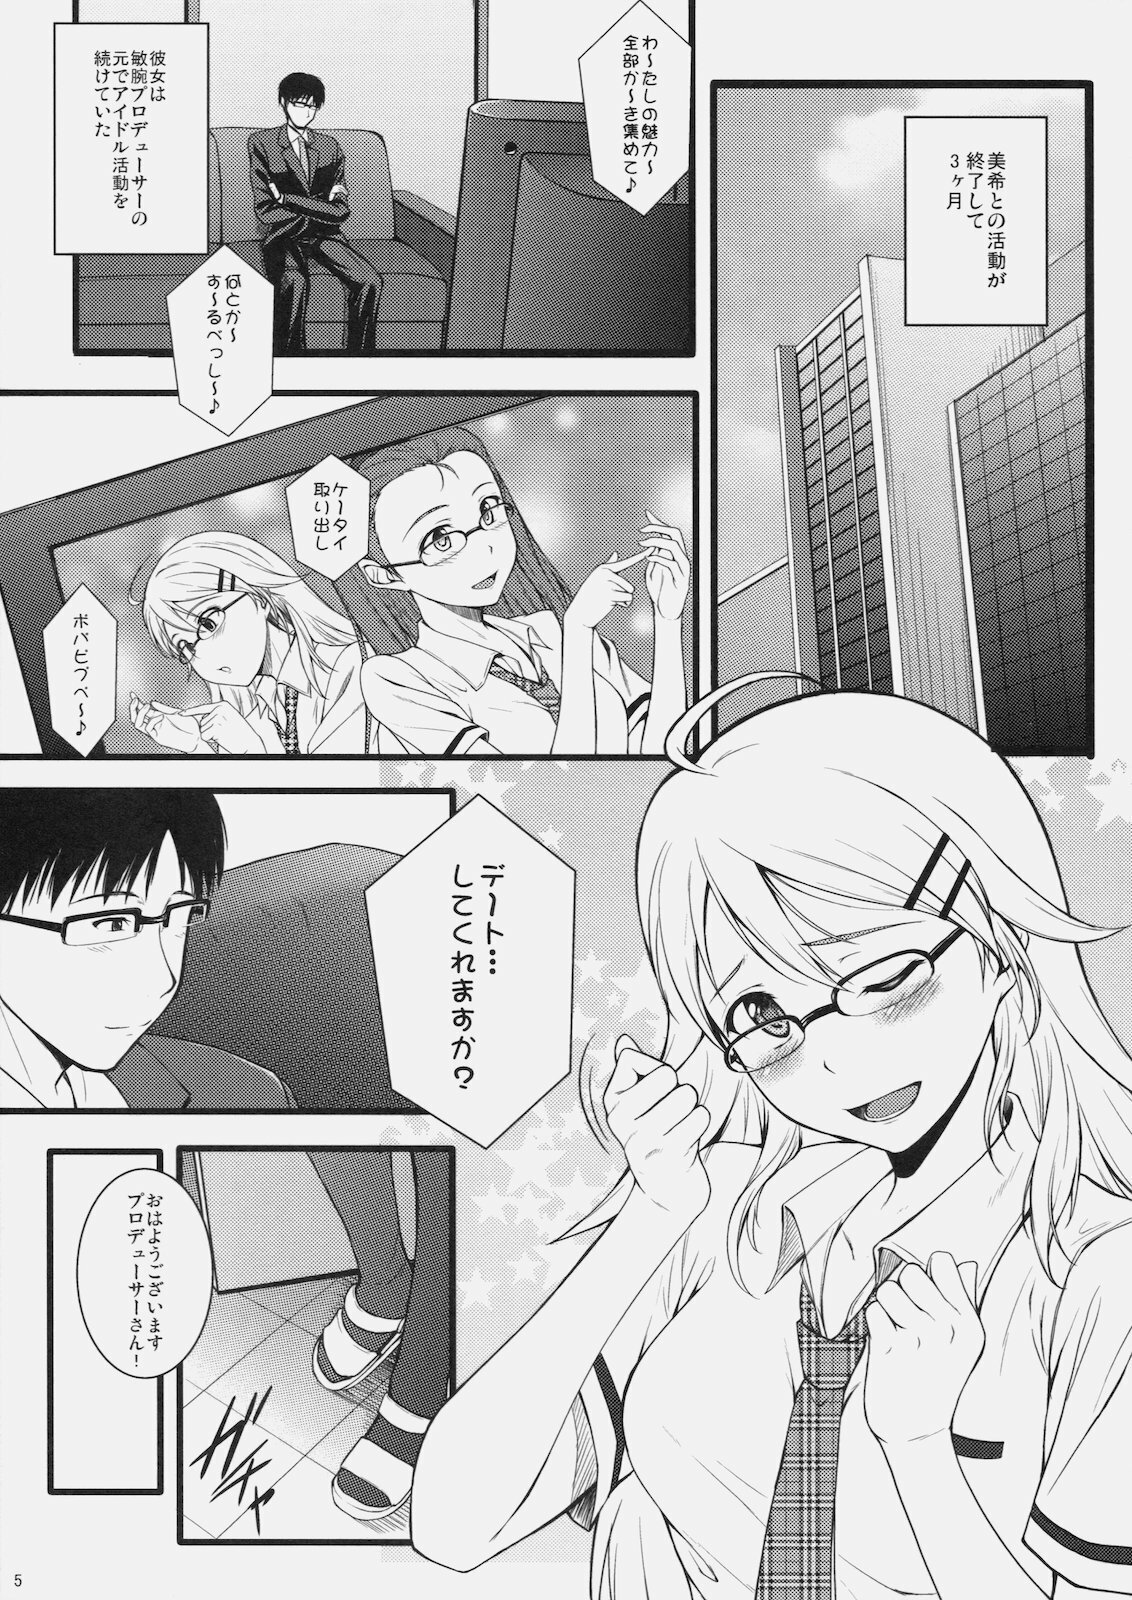 (C79) [Count2.4 (Nishi)] Continuation (THE iDOLM@STER) page 4 full